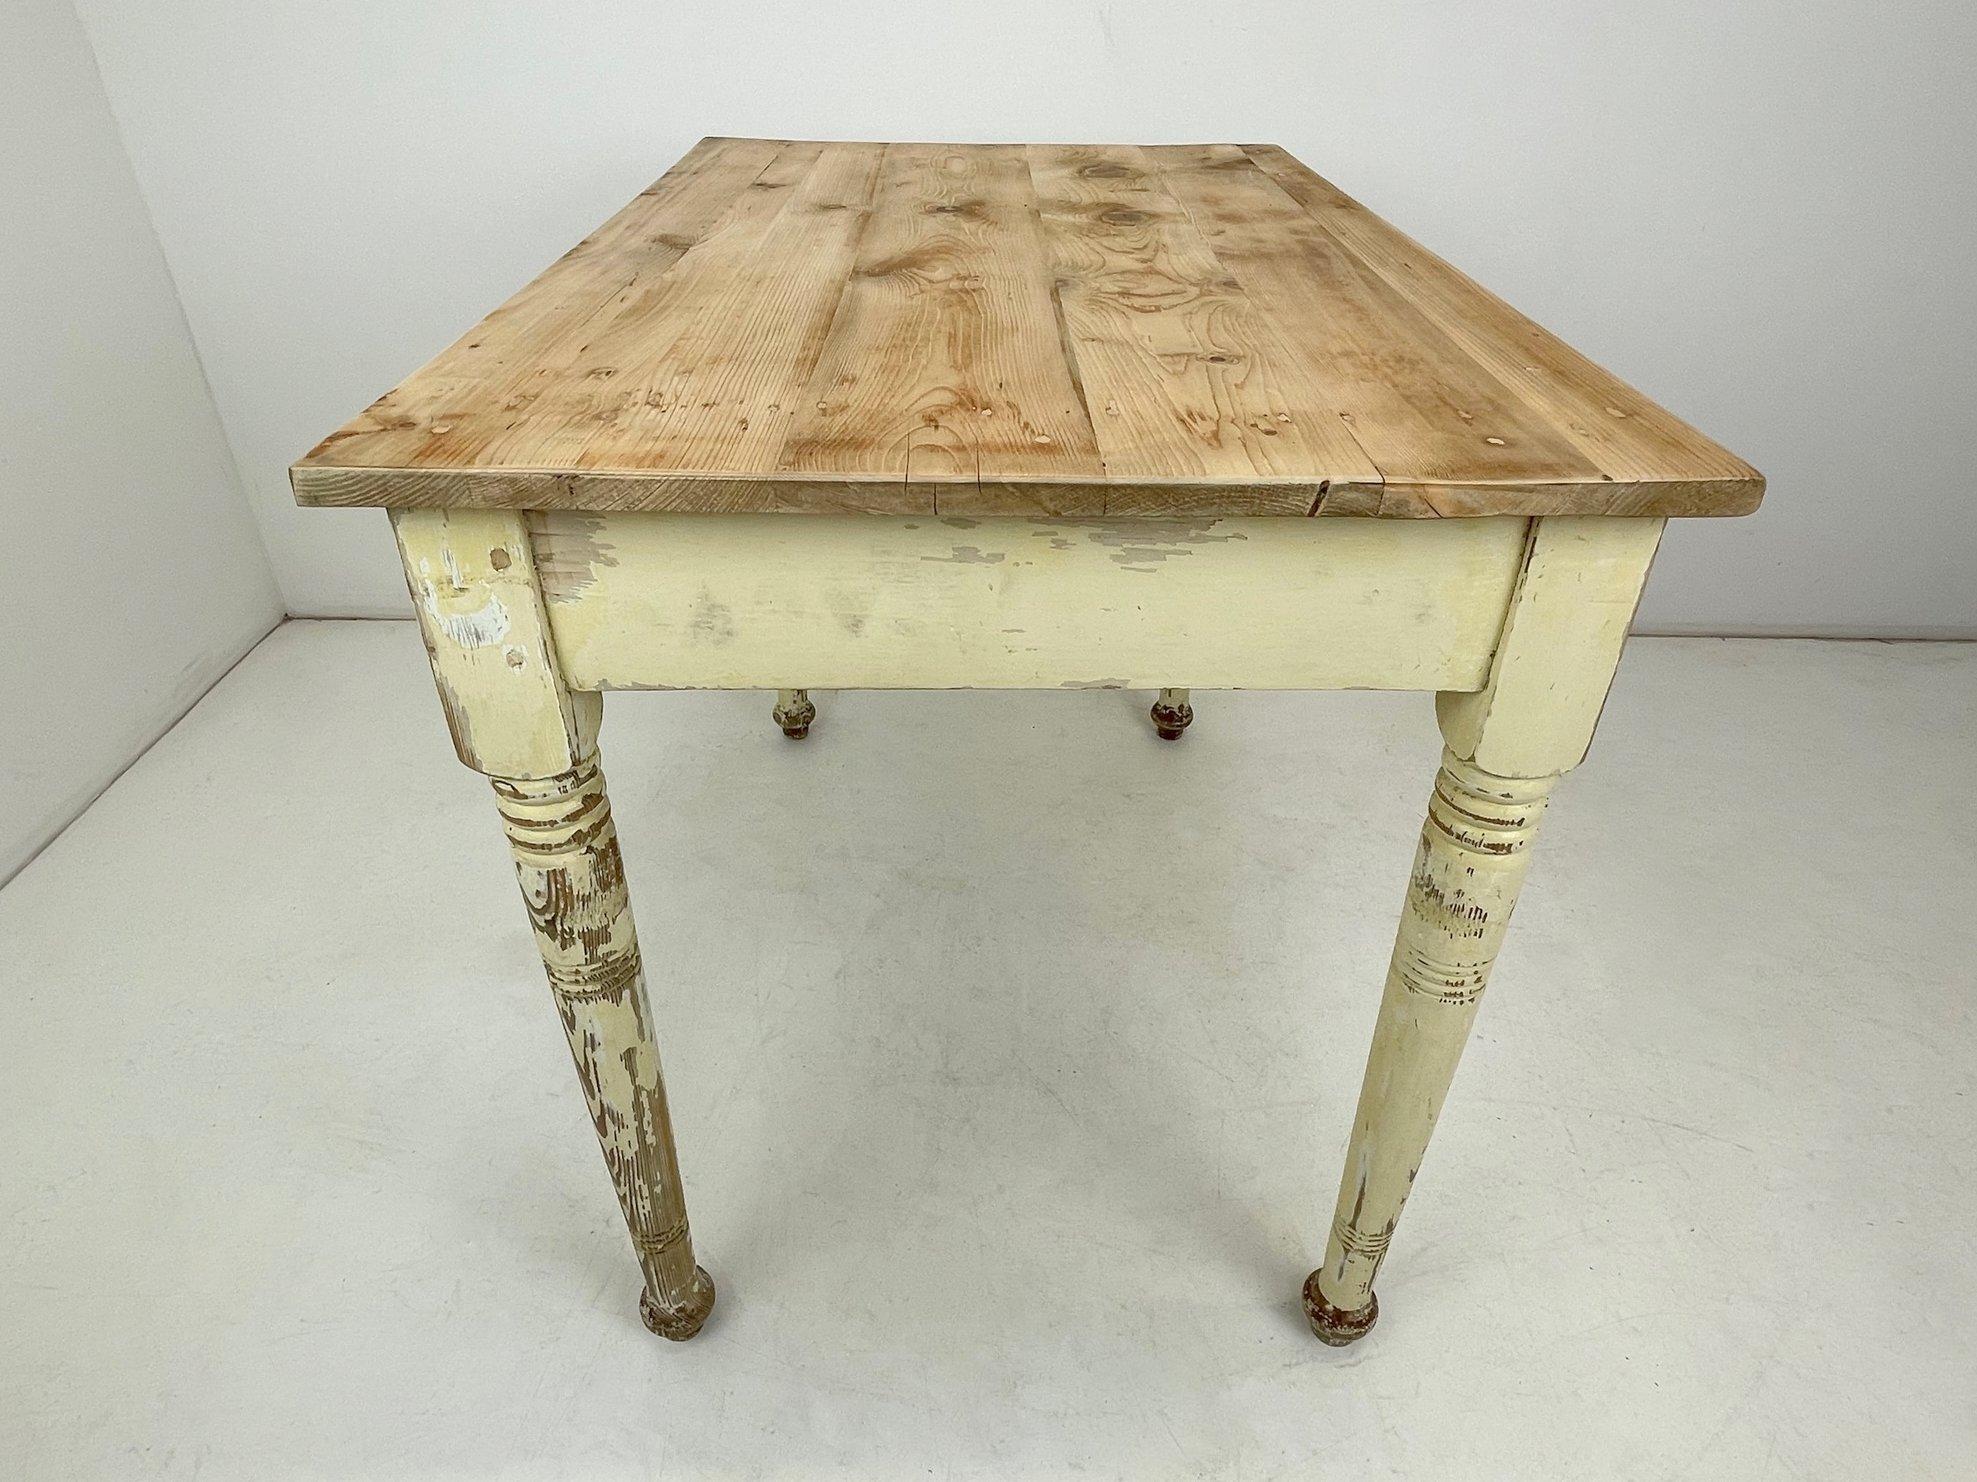 Early 20th Century Wooden Work Table or Writing Desk with Original Patina For Sale 4